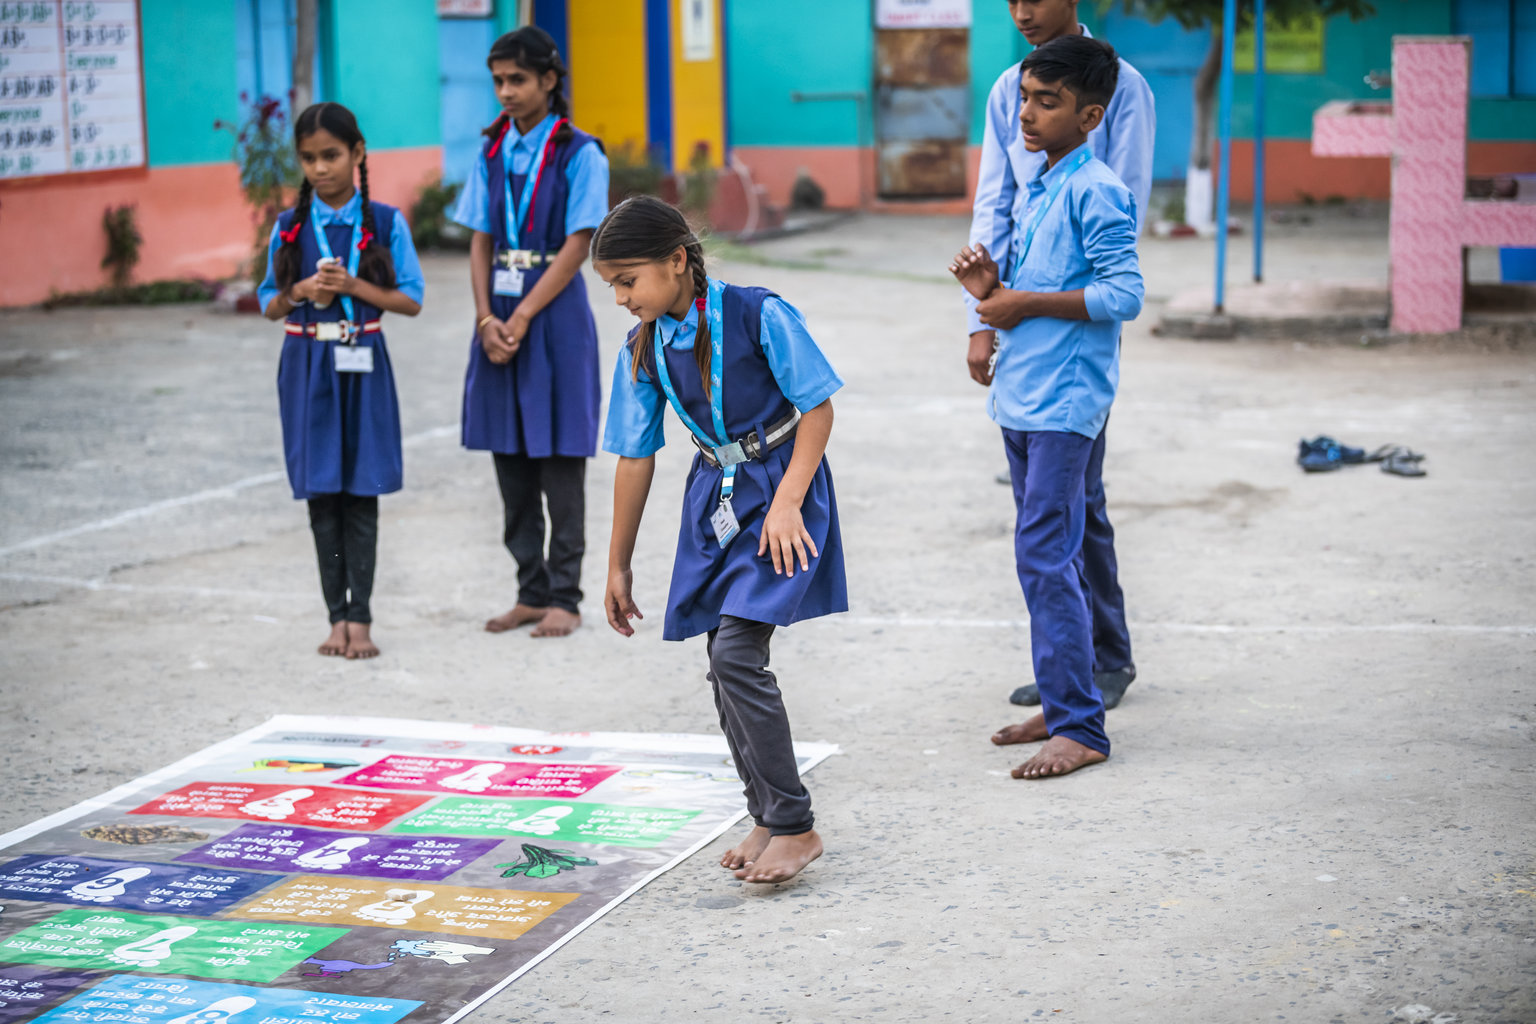 A group of students play a game in the schoolyard